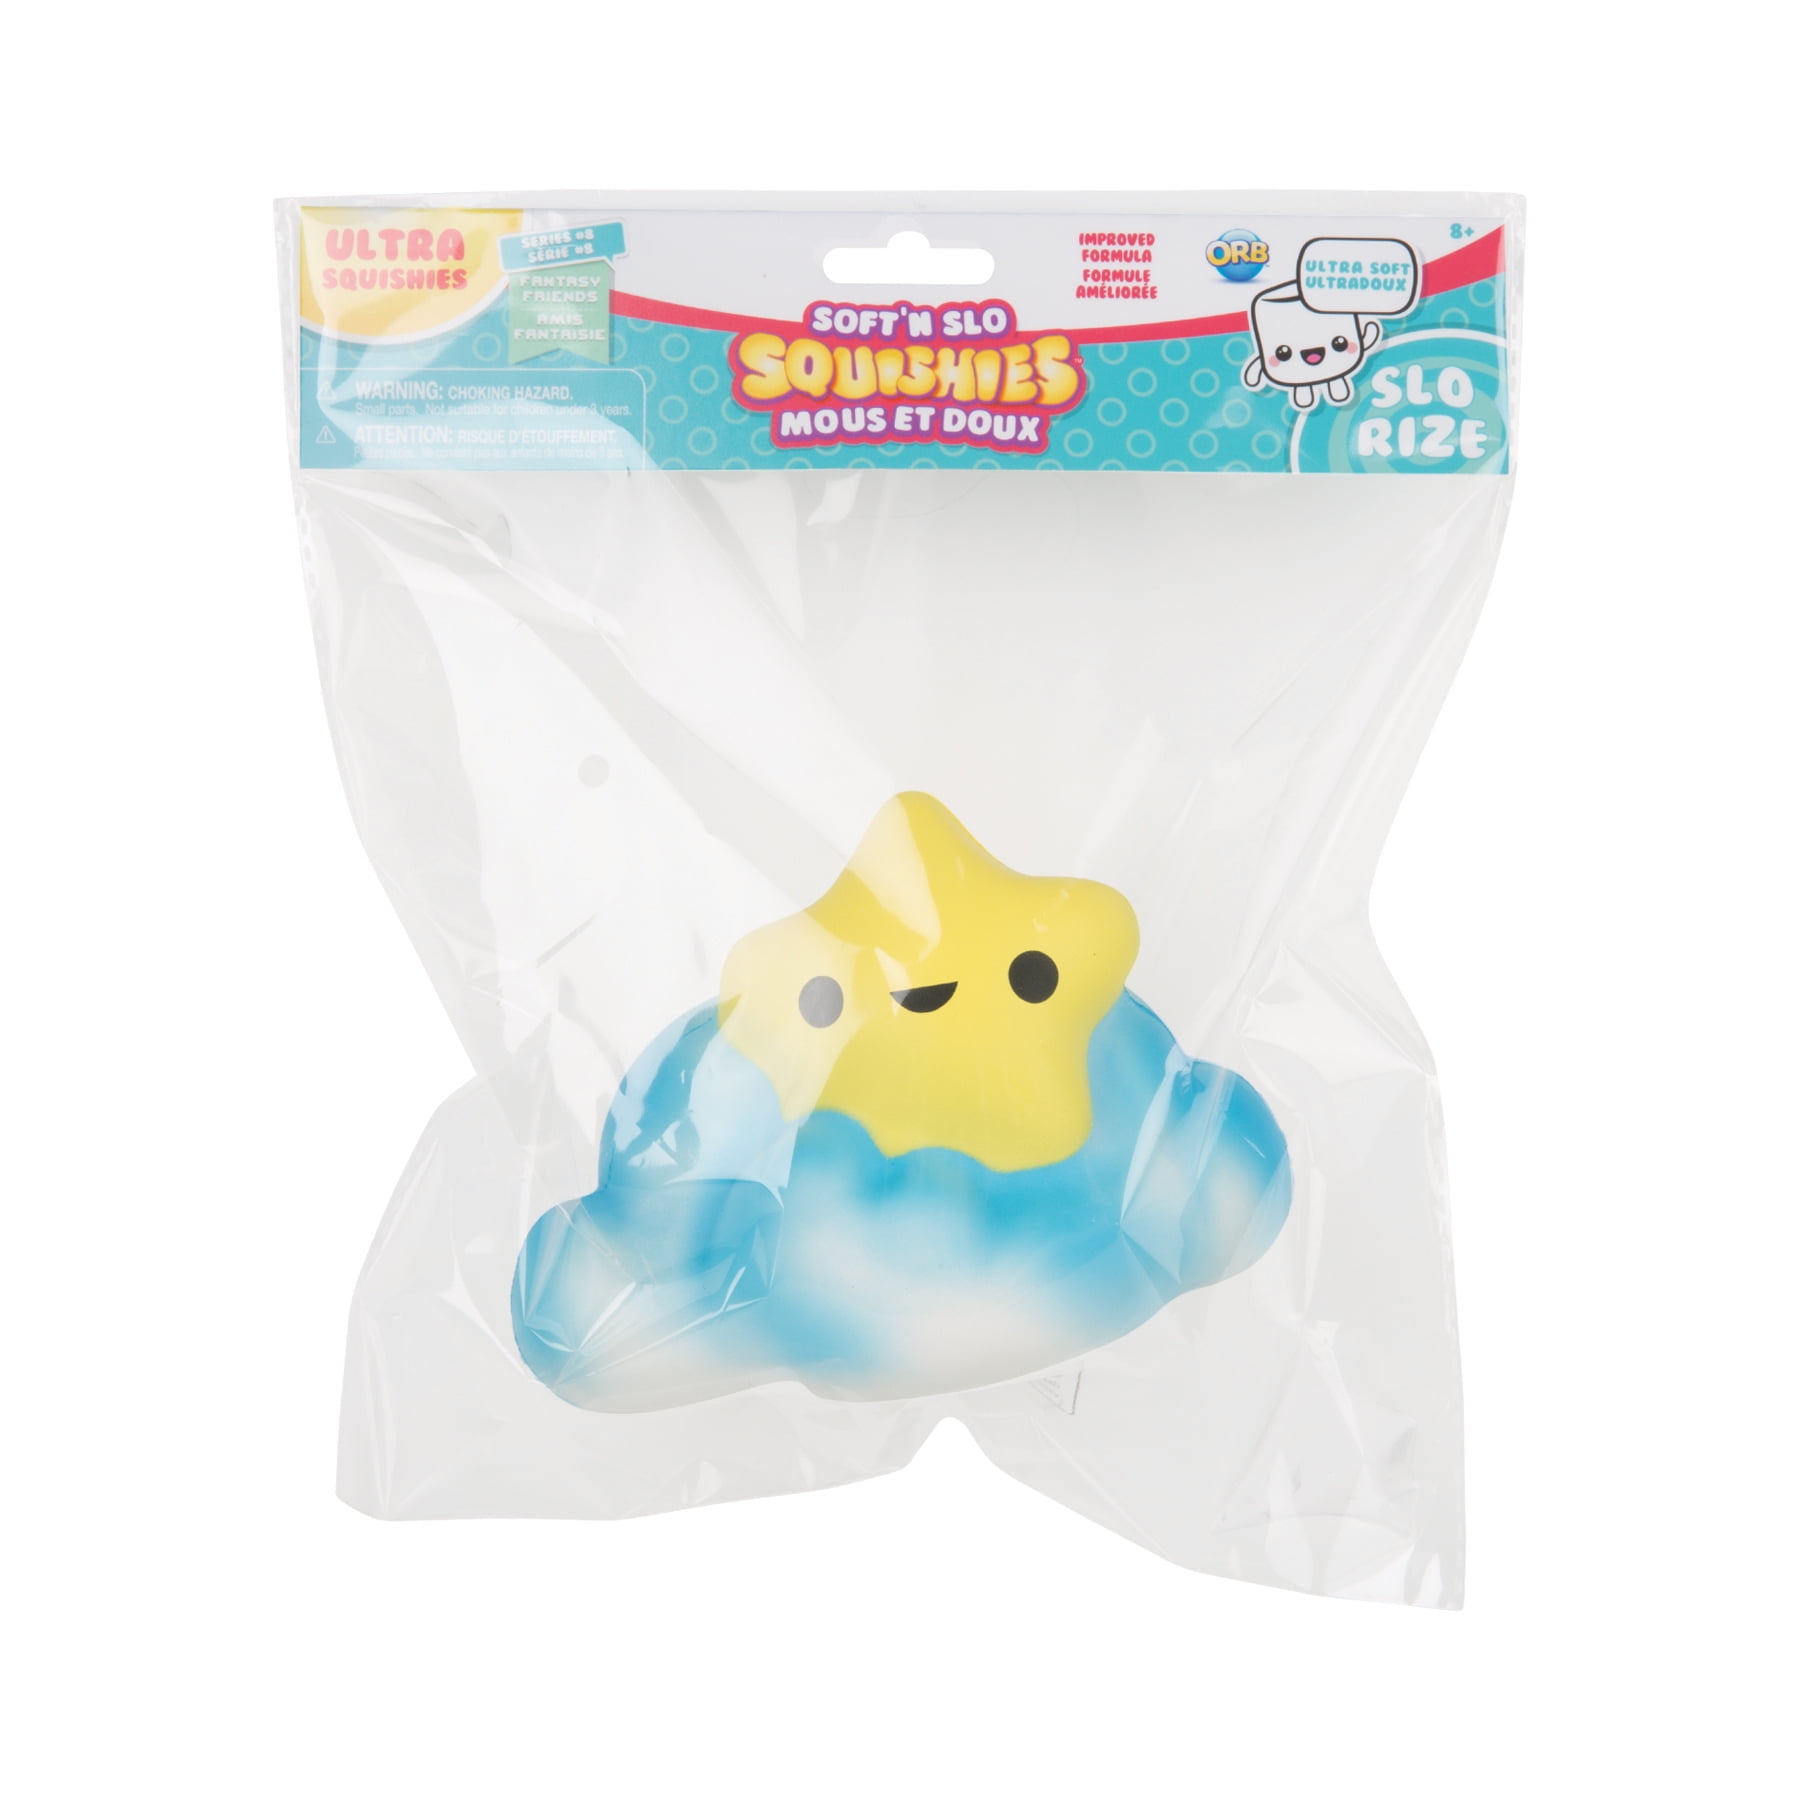 Soft N Slo Squishies Collectors Pack 12 Limited Edition Soft’N Slo Gift by ORB 